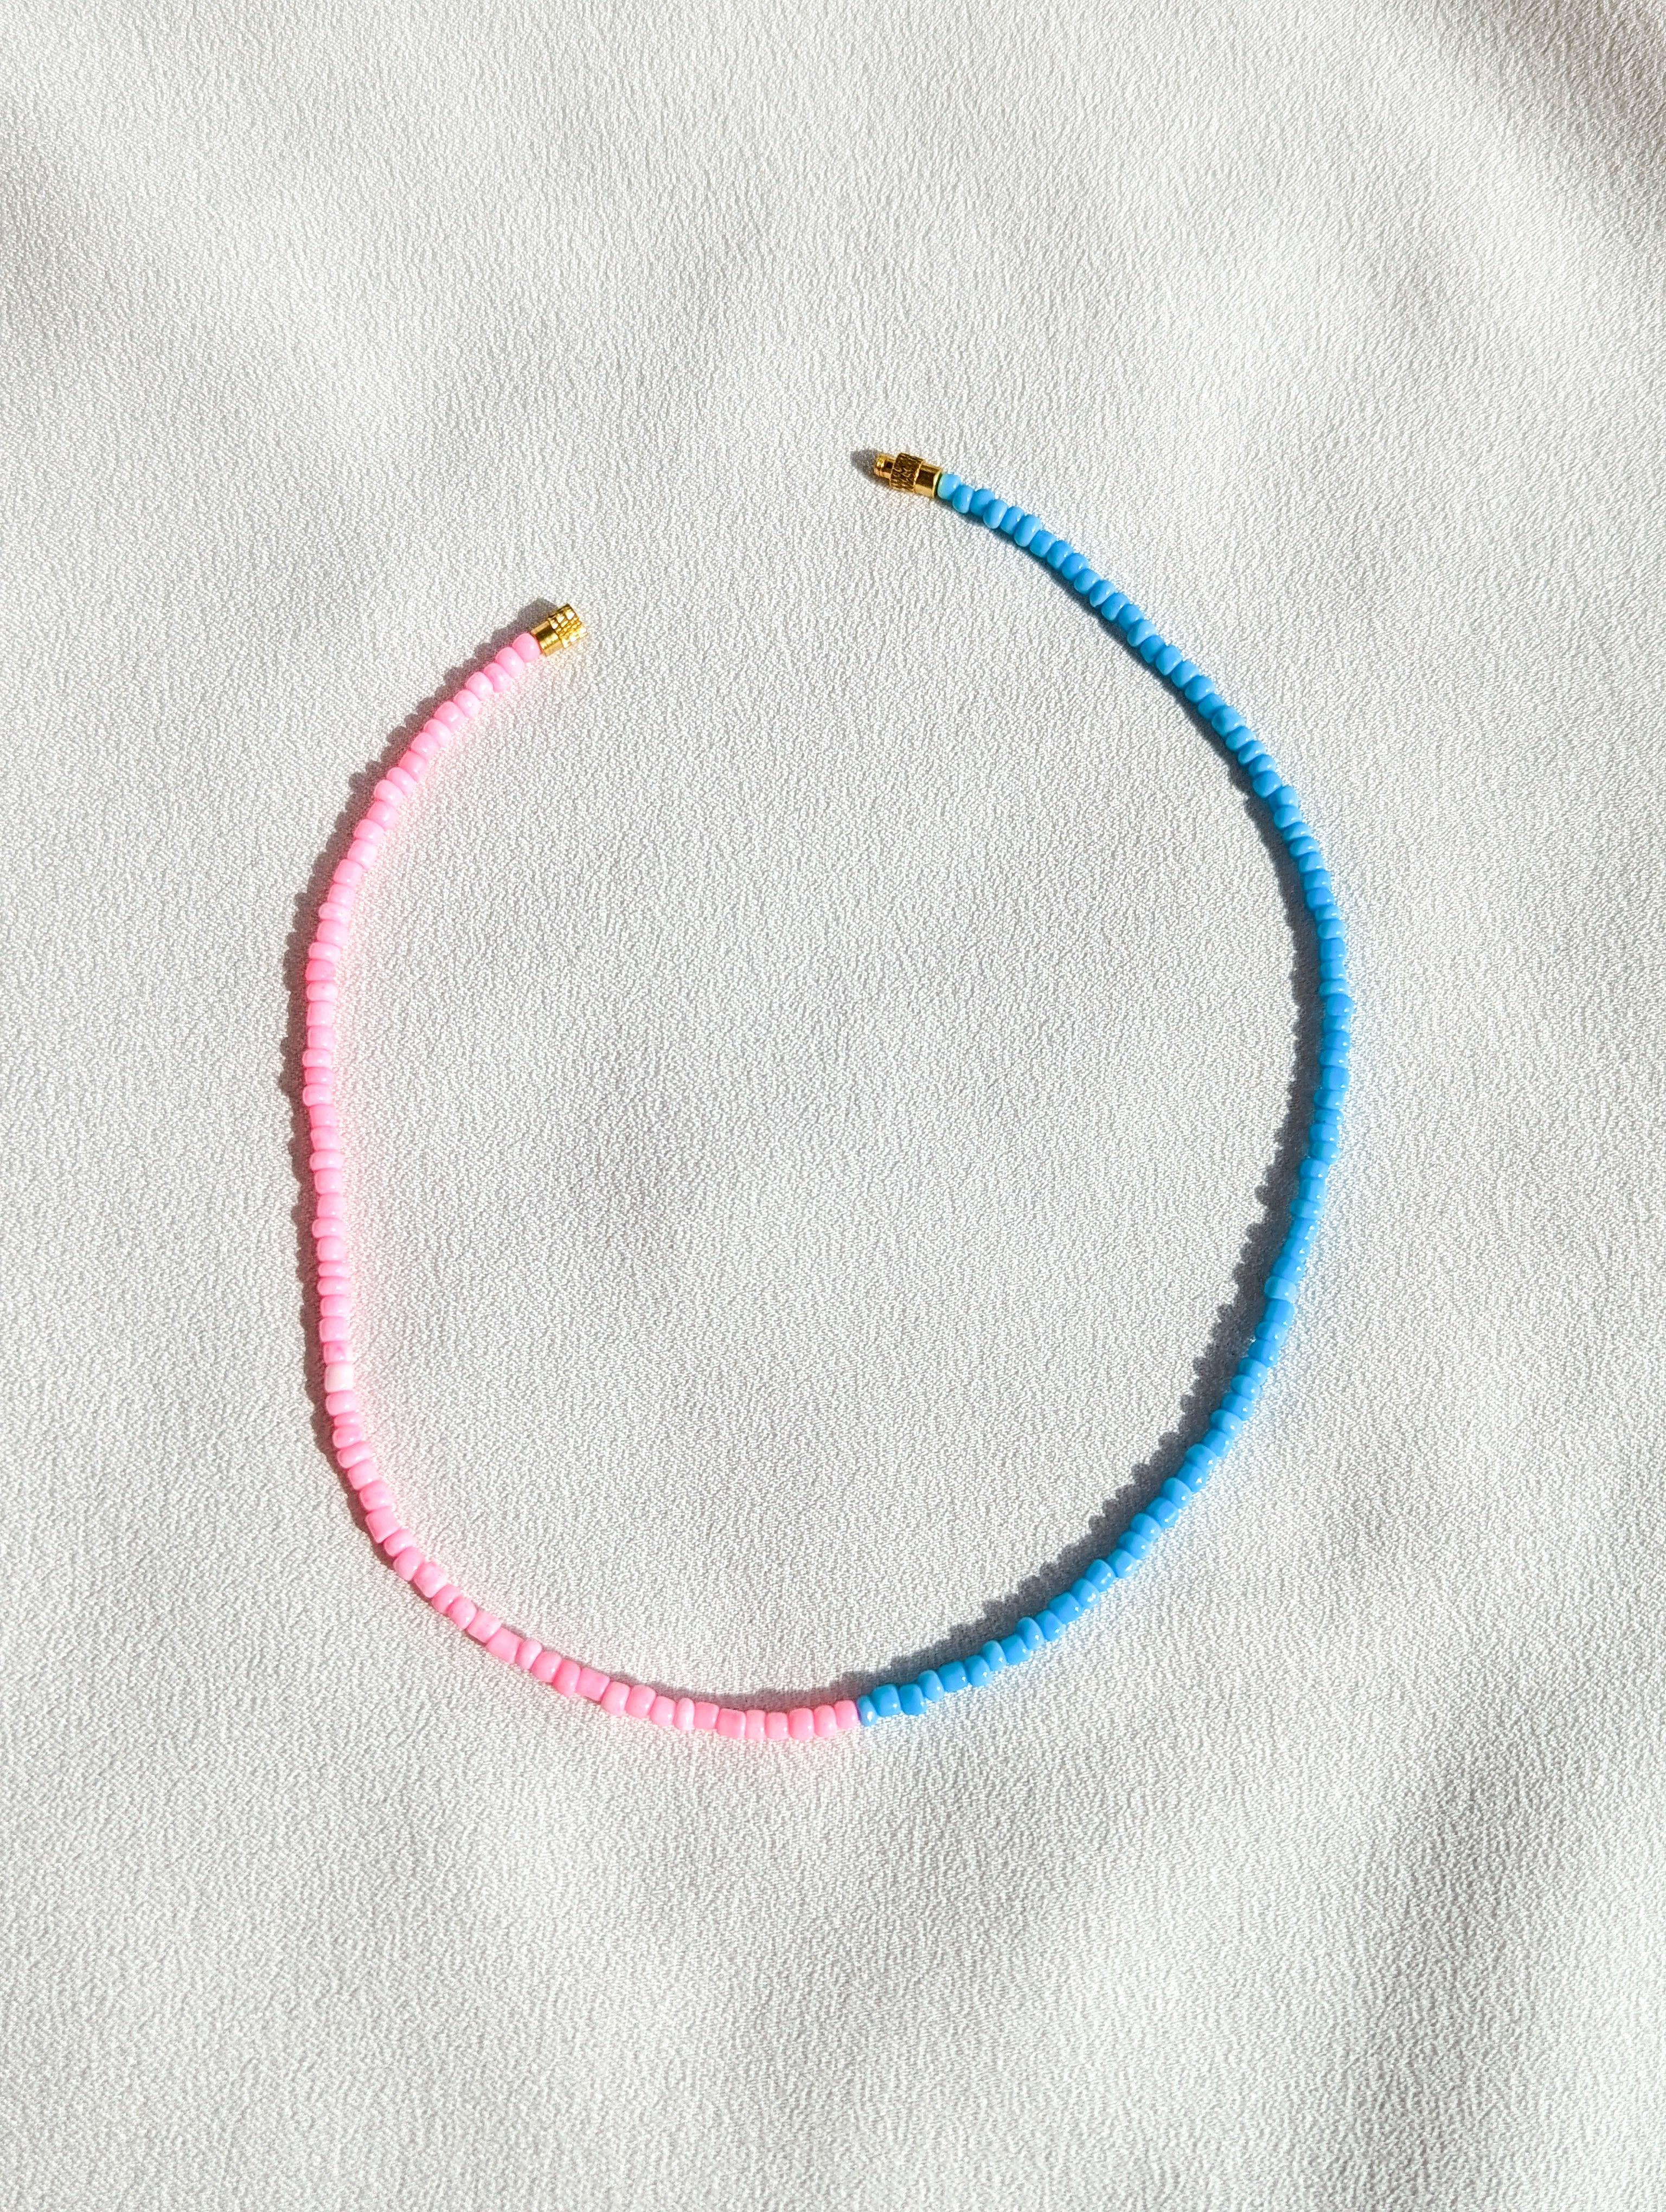 [THE FIFTY] Necklace: Blue/Pink [Small Beads]